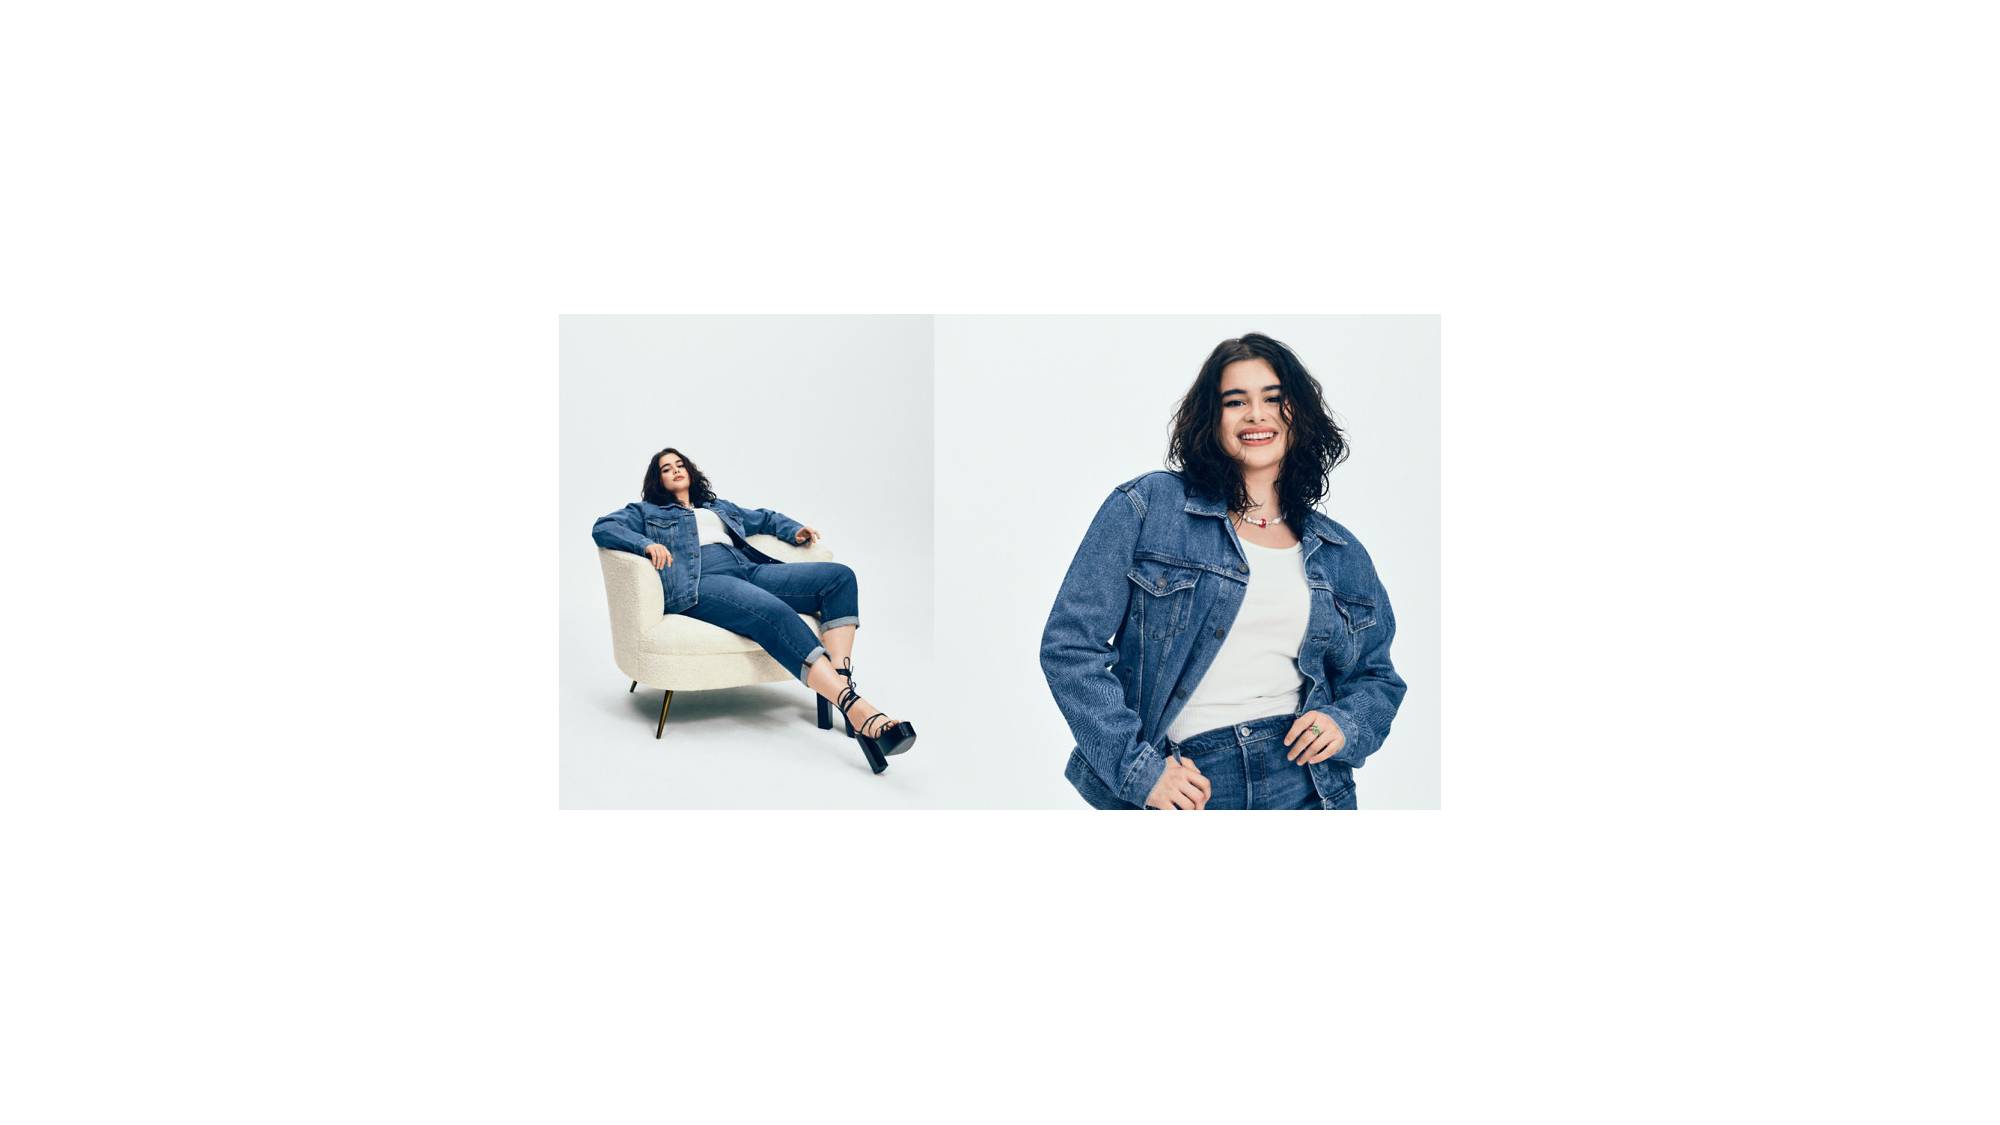 Three photos of Barbie Ferreira in a Levi's trucker jacket and jeans